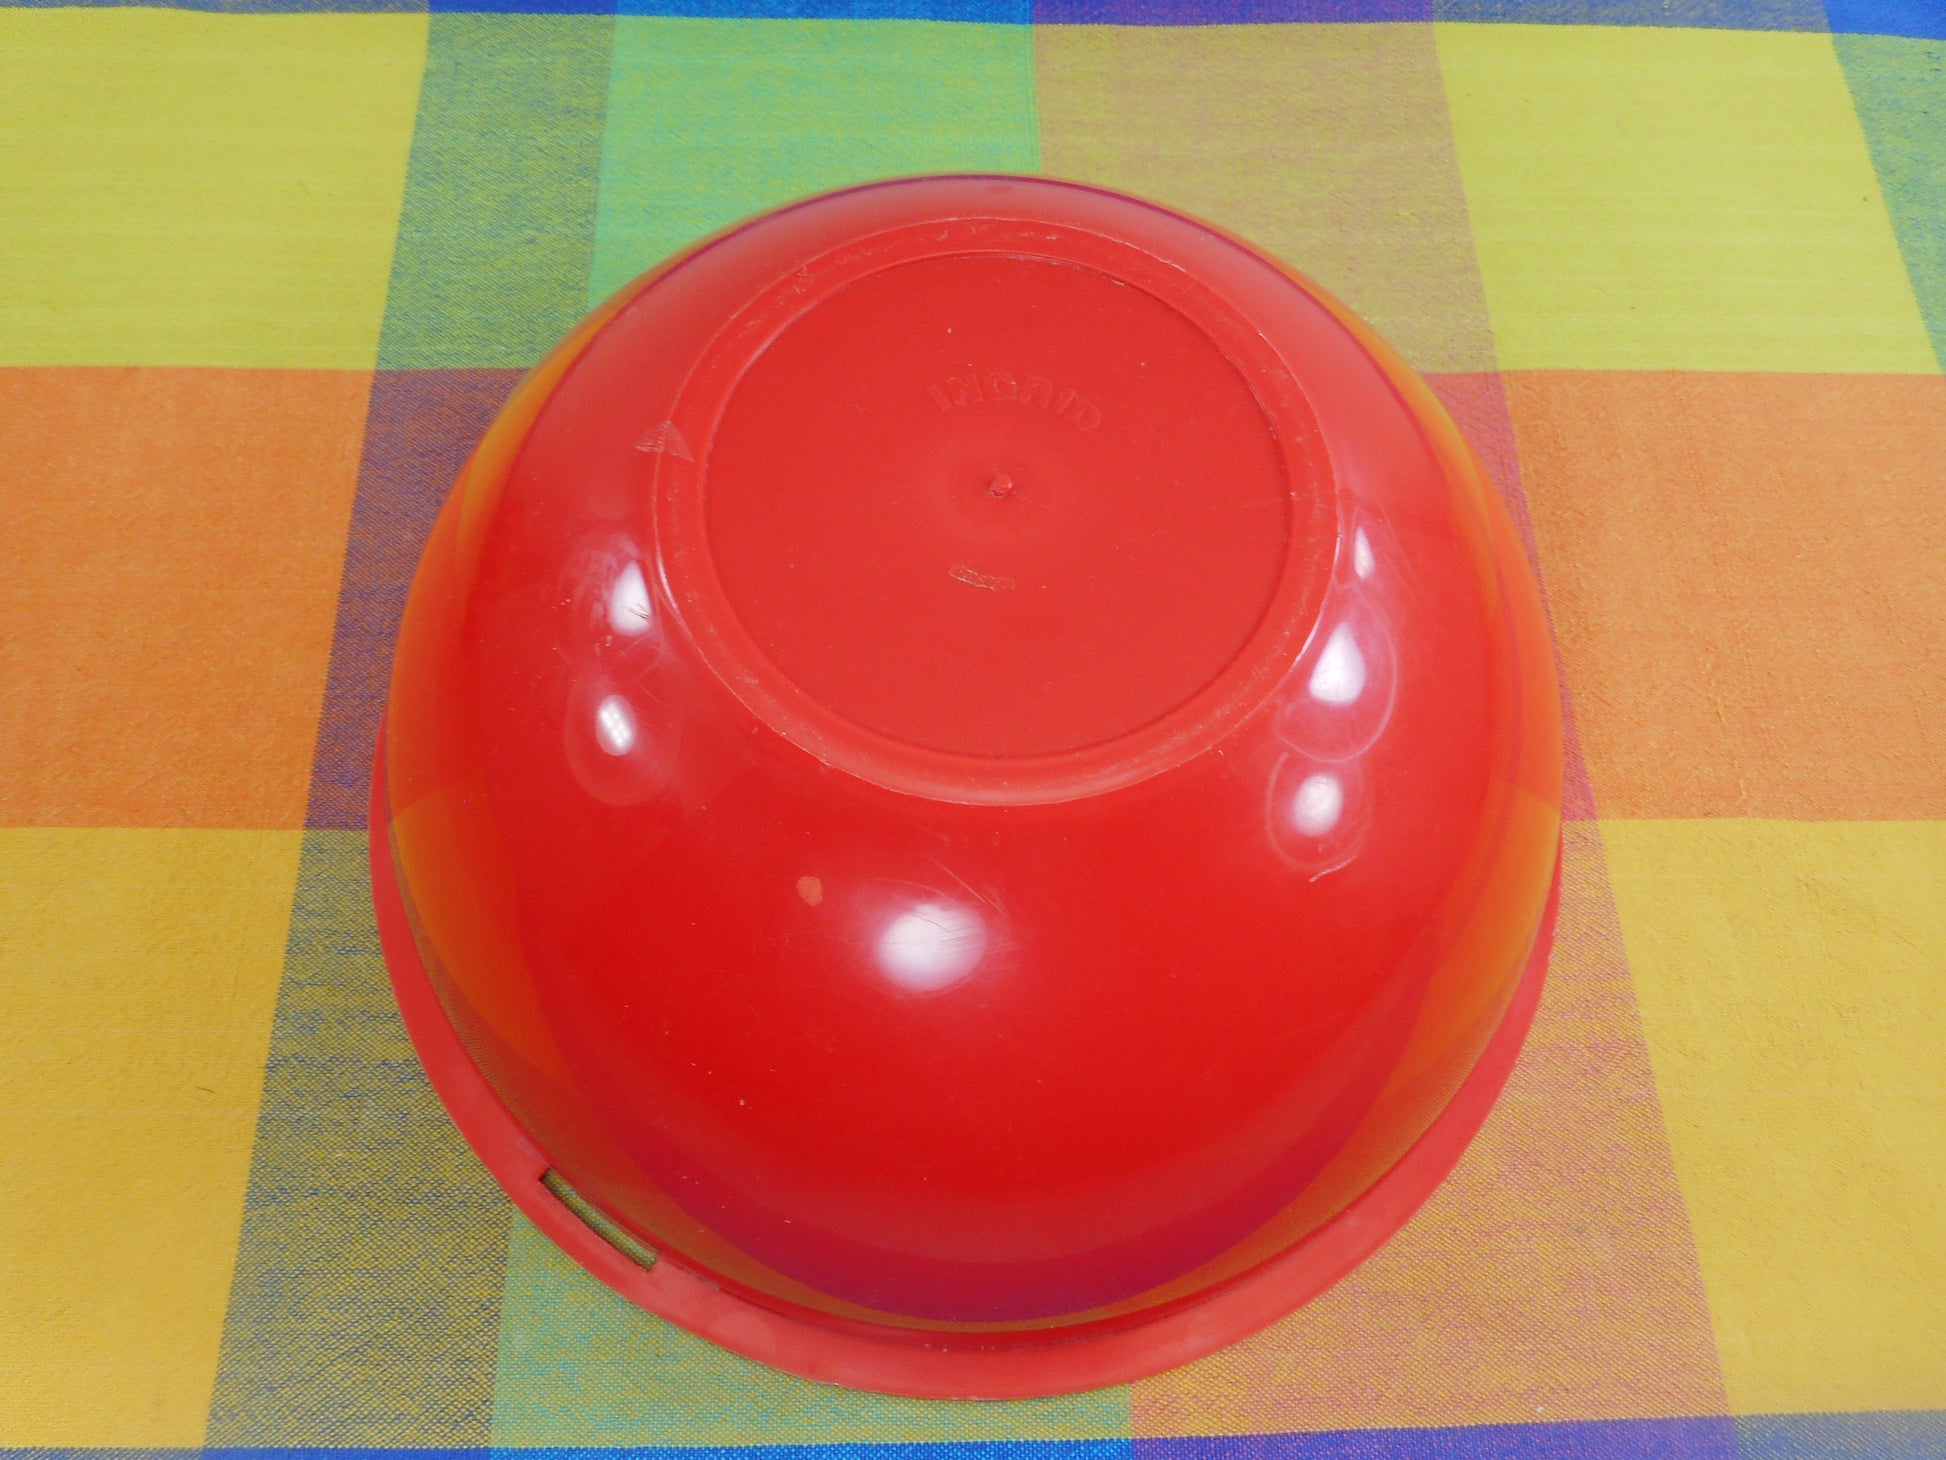 Ingrid Chicago Mod Plastic Party Ball Picnic Camping Set Replacement Part - Shell Case Red Half Vintage Used